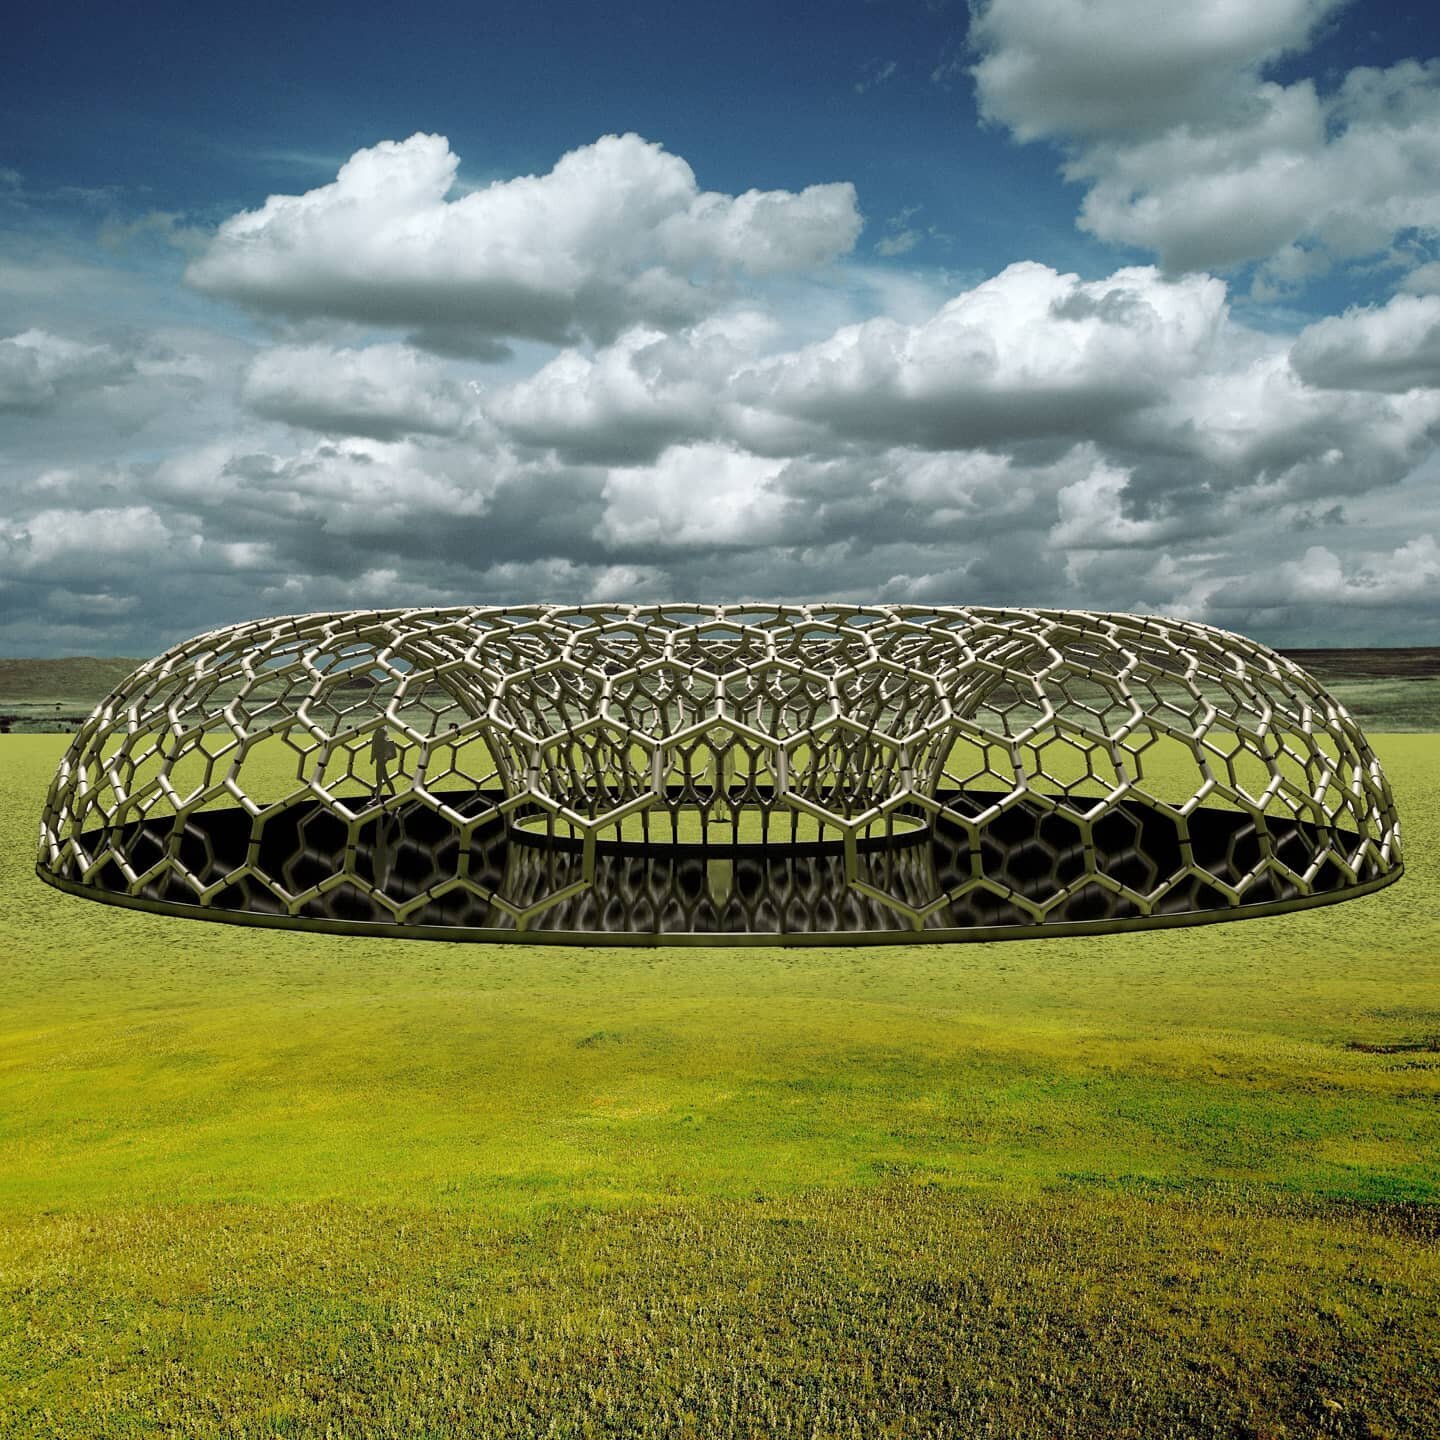 View of the Torus Pavilion from the ground, situated in a place that may no longer exist except in some NFT simulation..
*
The next render is a mock up of this jewelly-based architecture situated in a lake or some place of profound reflection... #axo